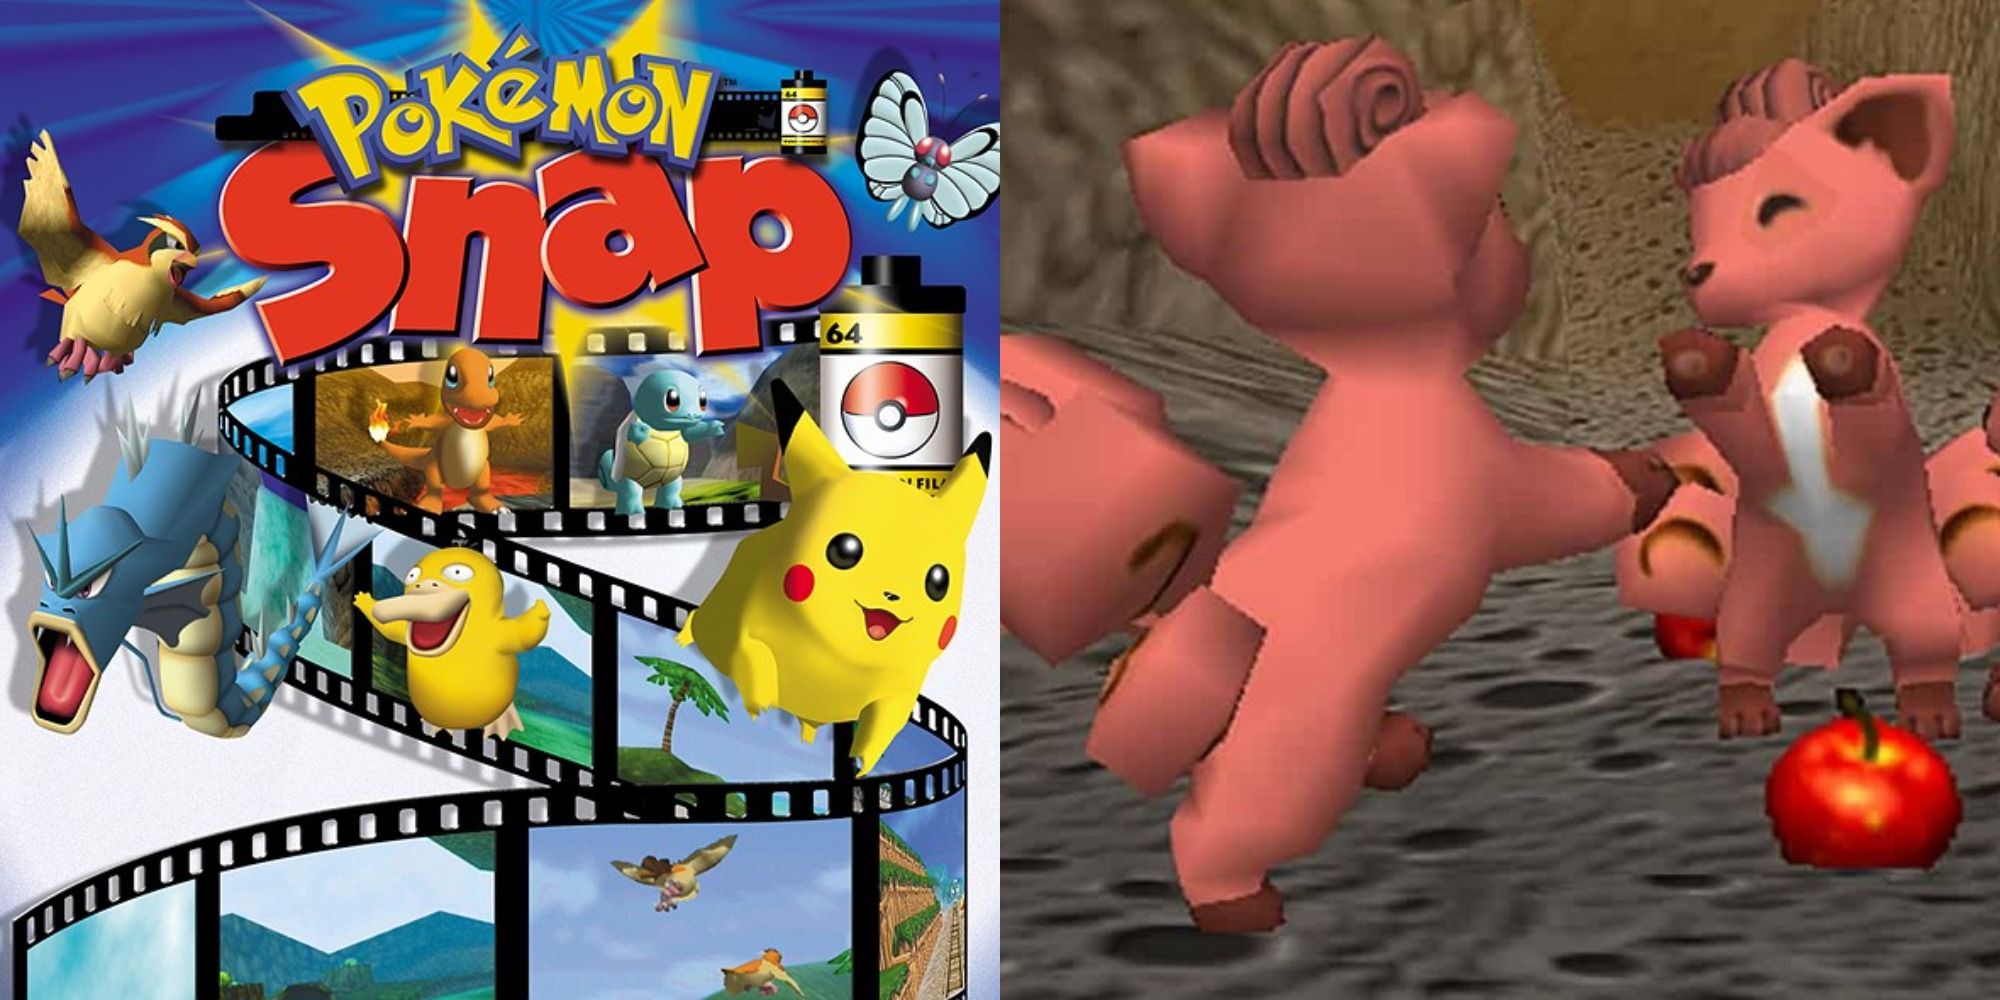 Split image showing the cover of Pokémon Snap and a group of dancing Vulpix in the game